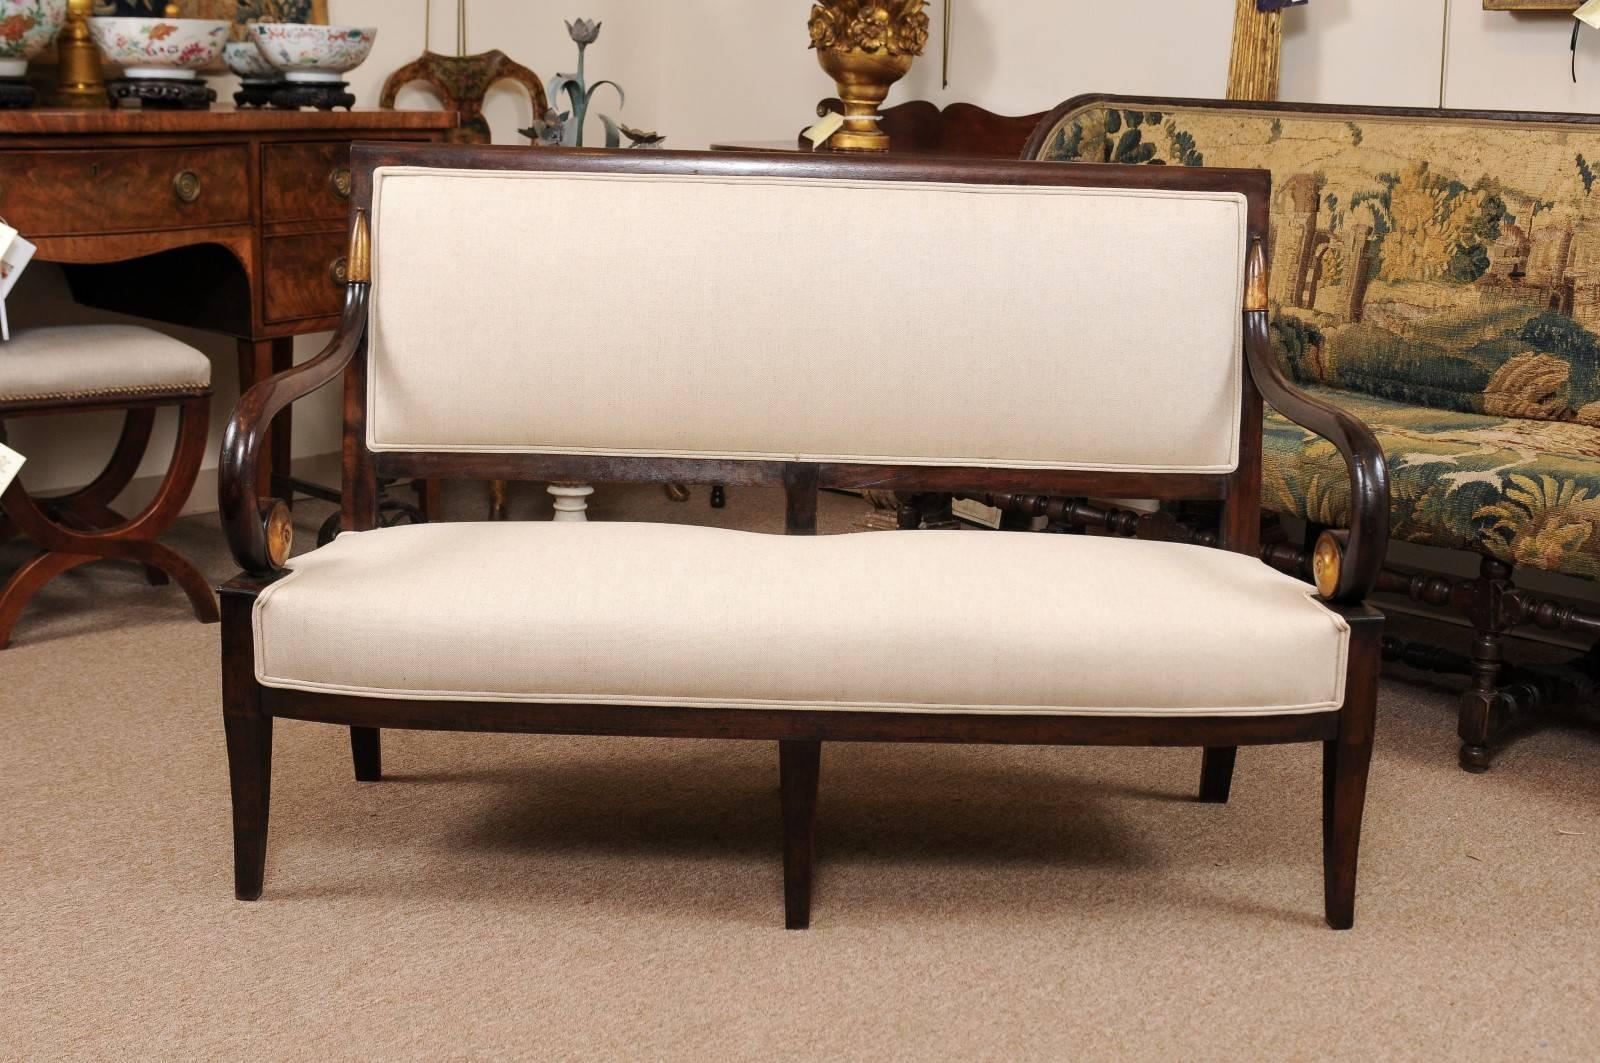 Empire Period Settee in Mahogany with Scroll Arms featuring Gilt Accents and Splay Legs, France circa 1820. The wood finish is in a dark chocolate hue juxtaposed against the light beige linen upholstery (new).